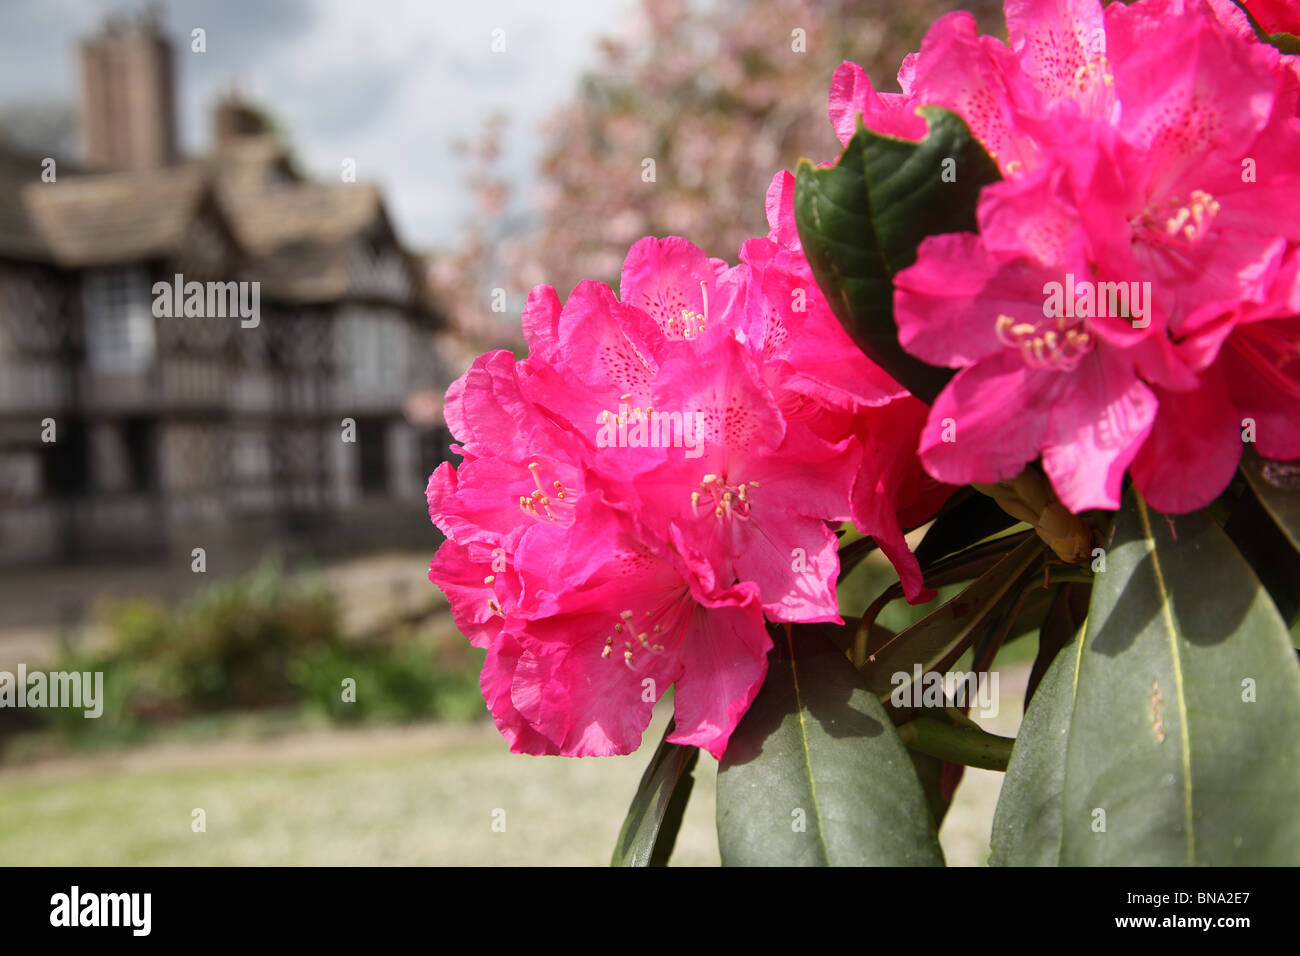 Adlington Hall & Gardens, England. Red rhododendrons in full bloom with the Tudor exterior of Adlington Hall in the background. Stock Photo